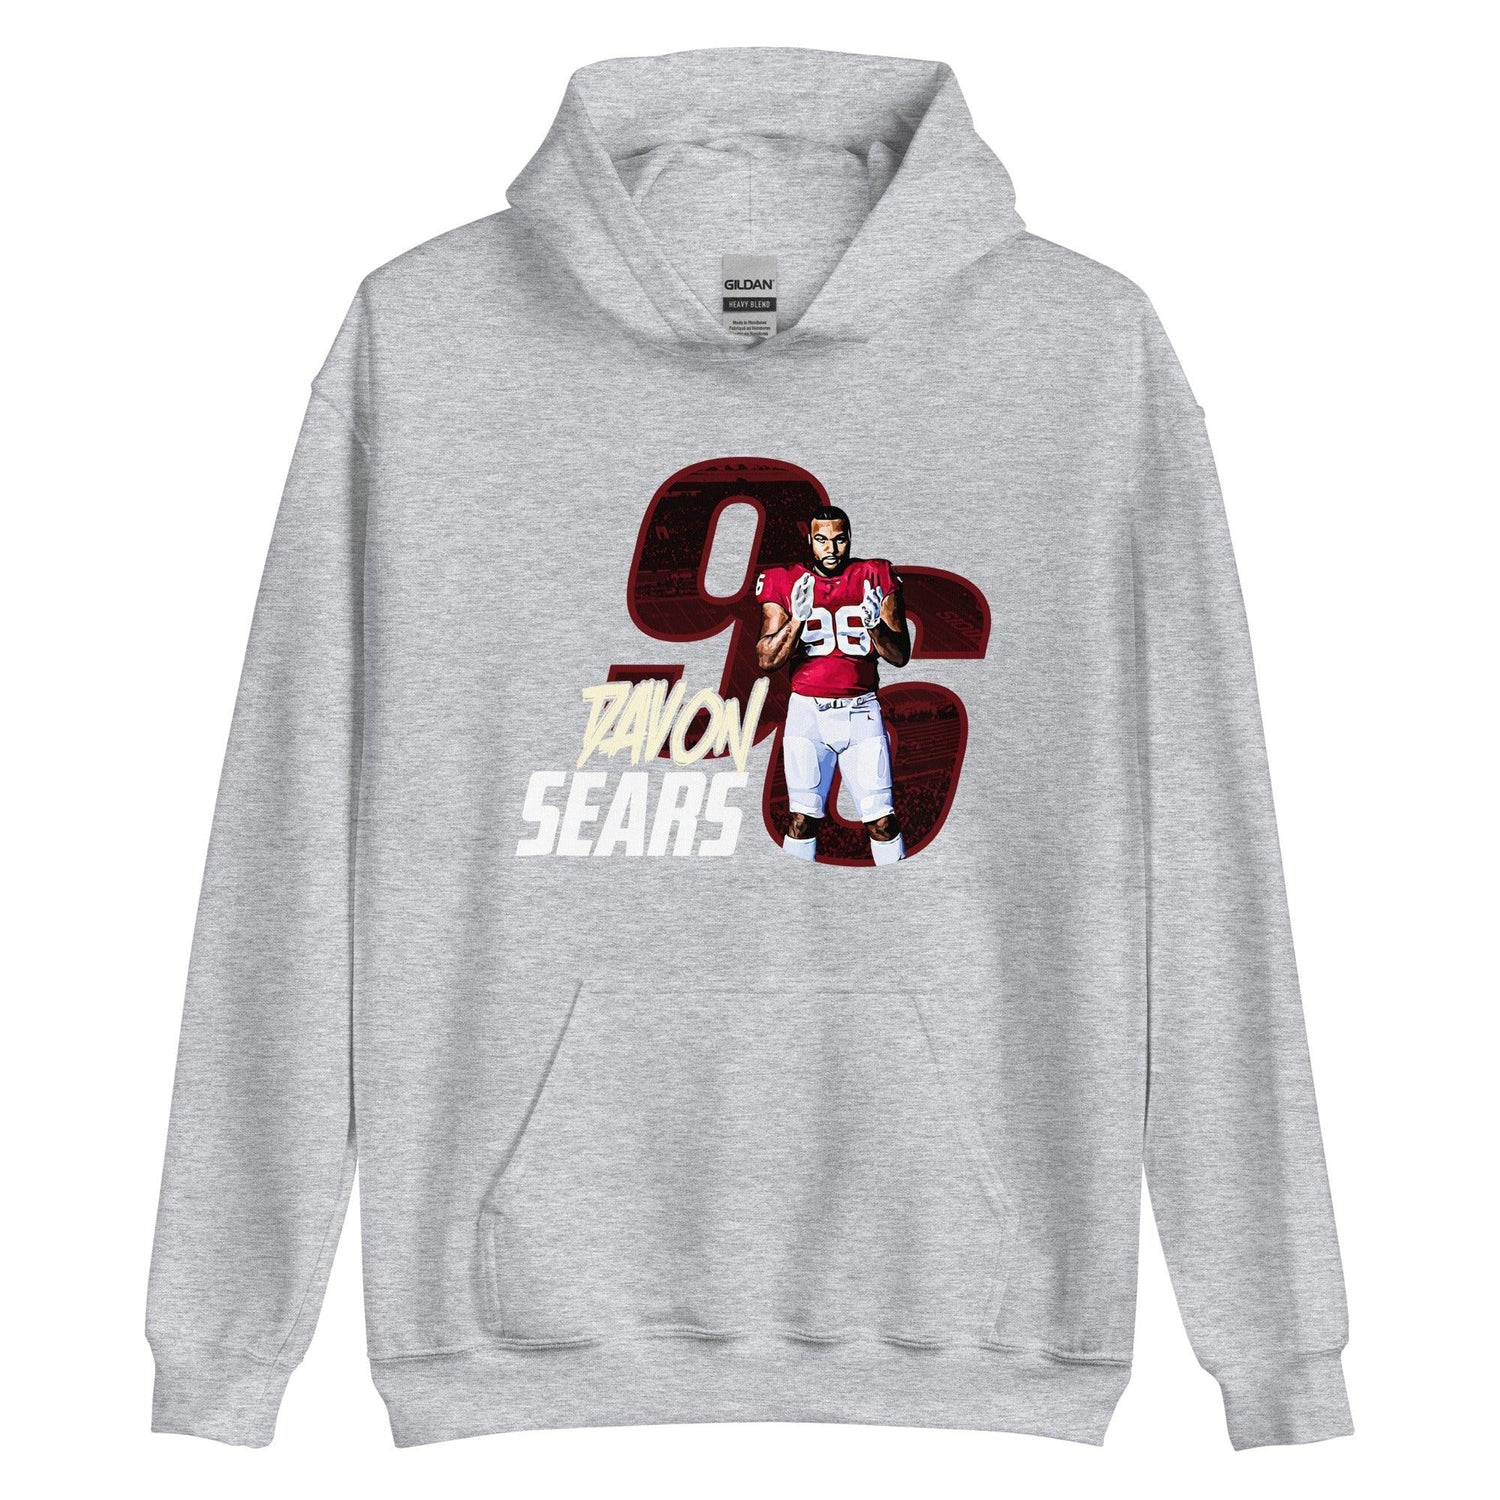 Davon Sears "Gameday" Hoodie - Fan Arch